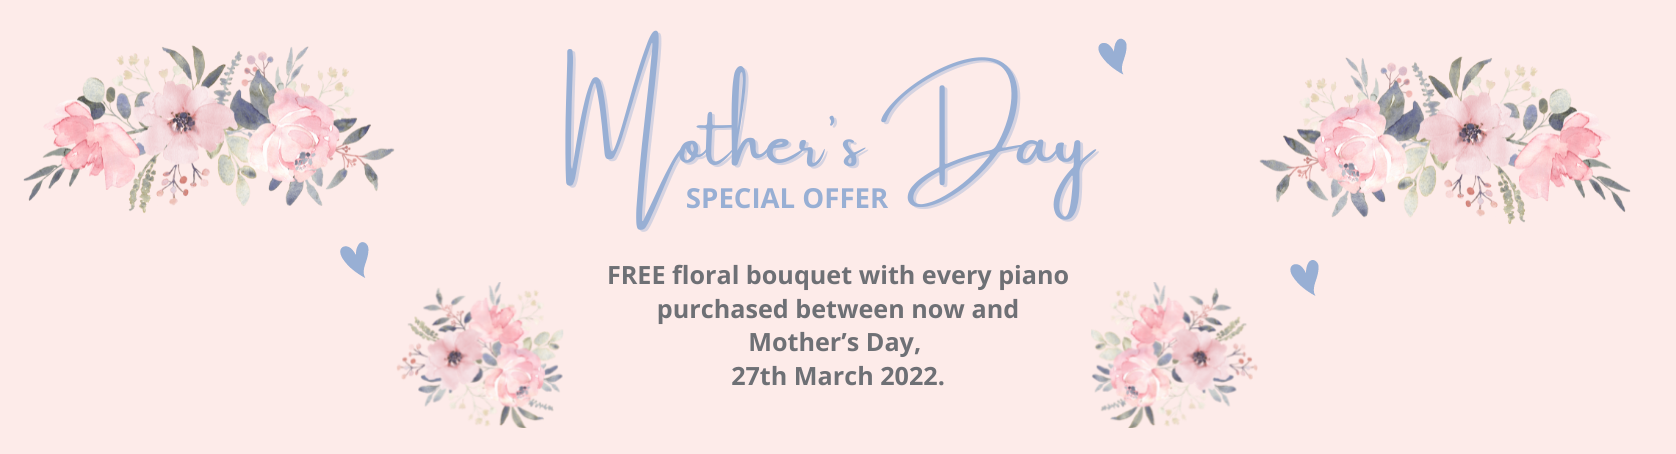 Mother's Day Offer 2022